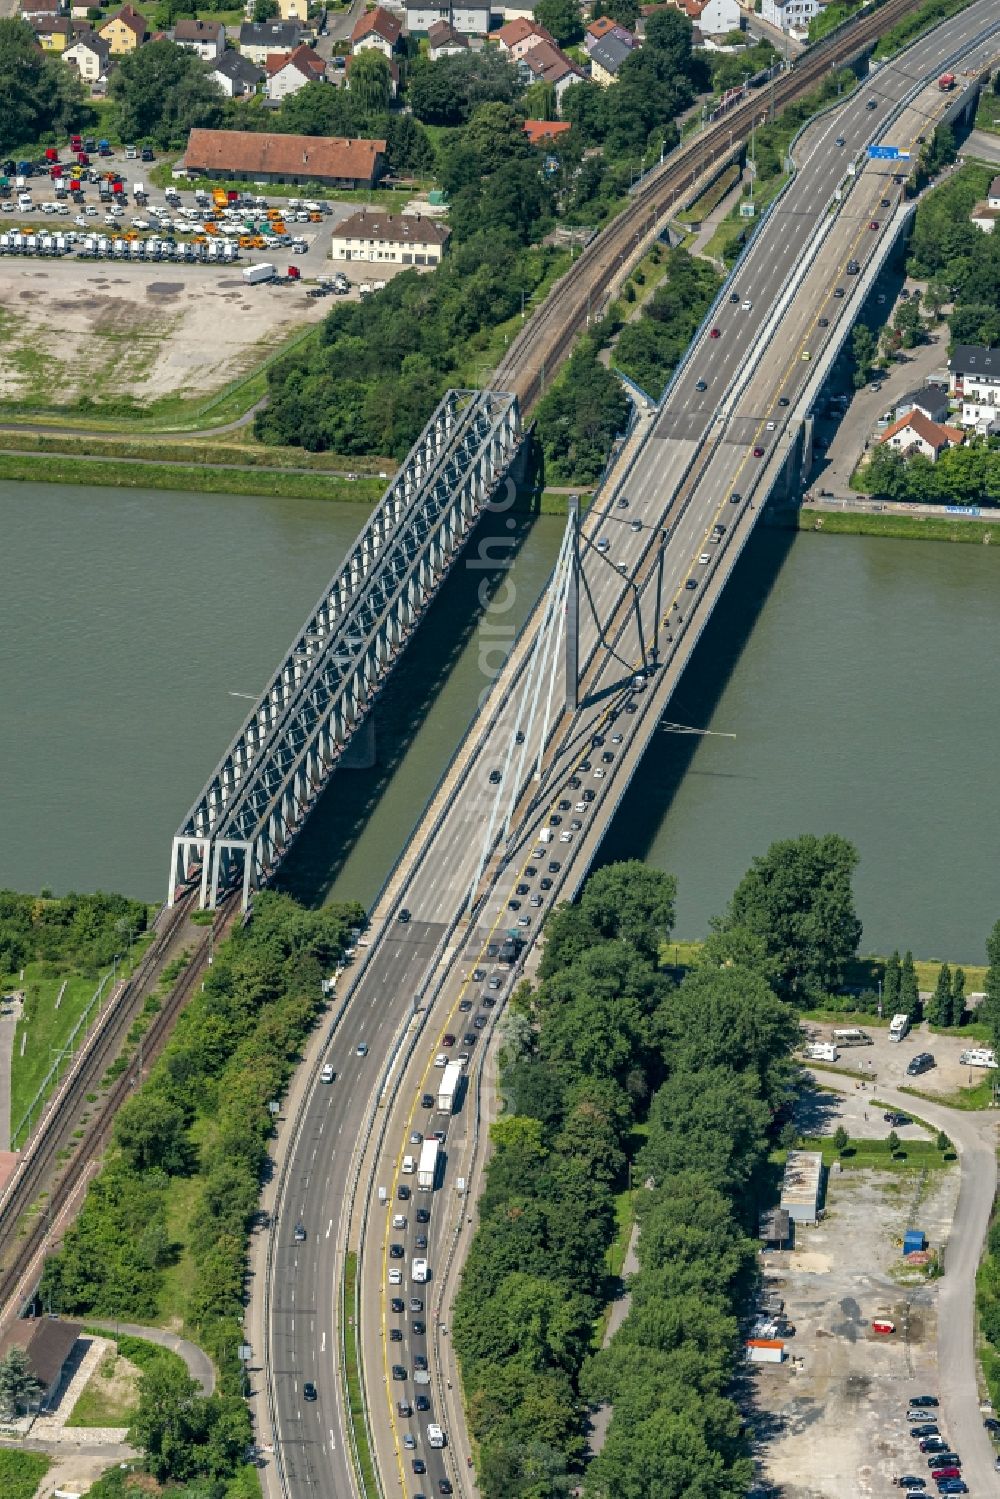 Aerial image Wörth am Rhein - Routing and traffic lanes over the highway bridge in the motorway A 10 crossing the rhine in Woerth am Rhein in the state Rhineland-Palatinate